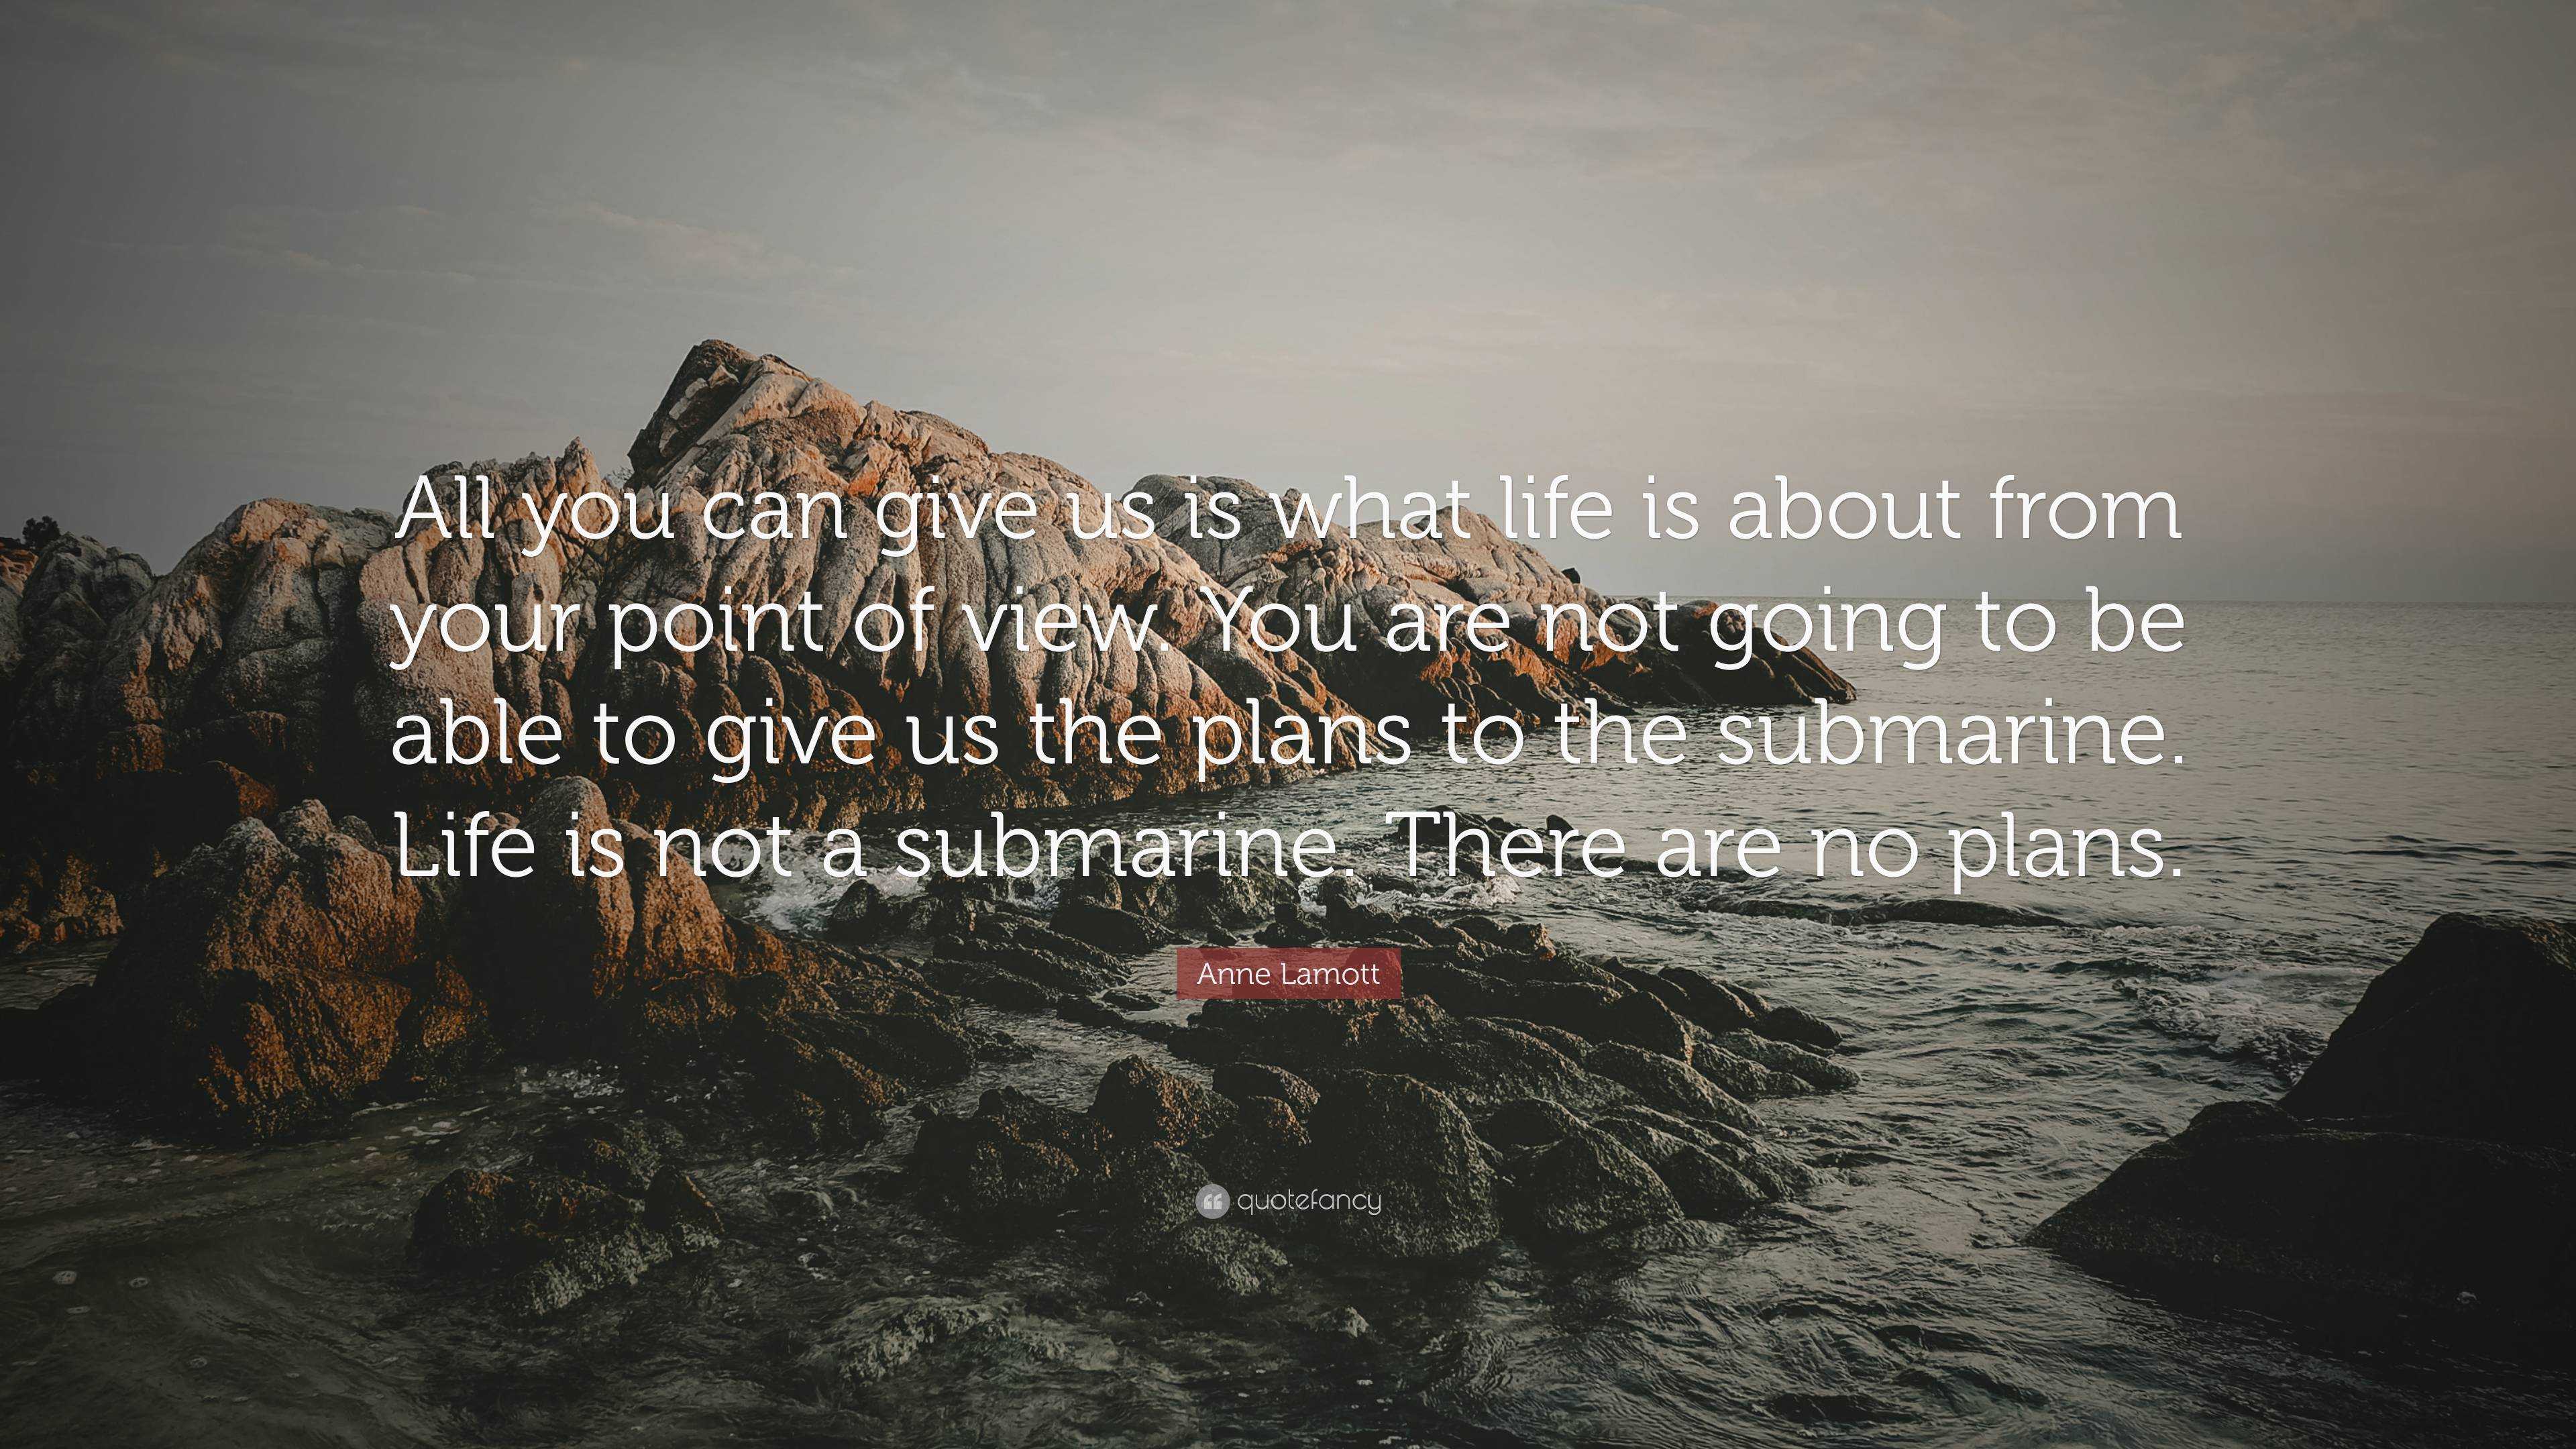 Anne Lamott Quote: “All you can give us is what life is about from your ...